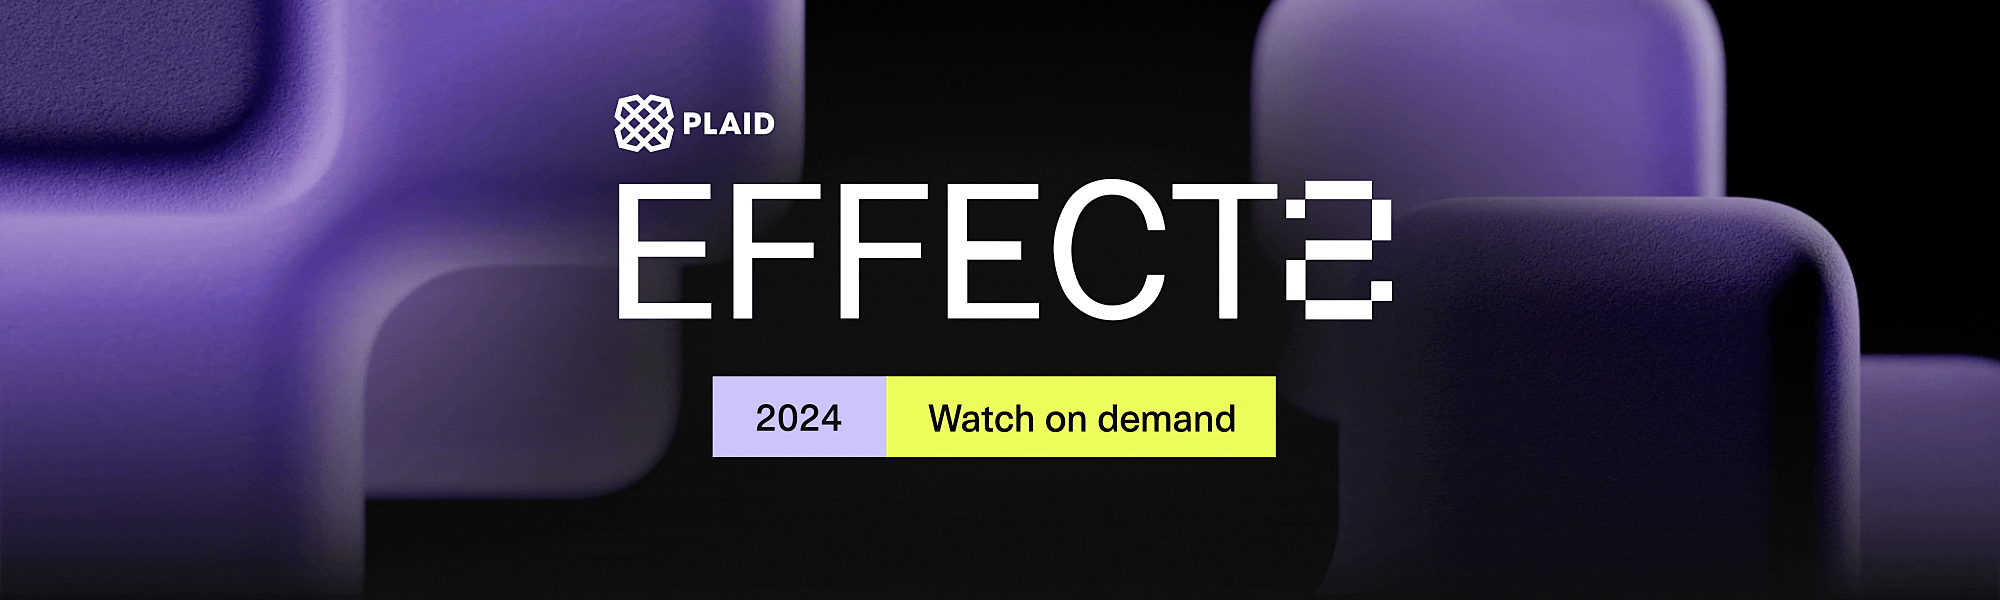 Plaid Effect 2024 promotional banner with the text 'Watch on demand'.